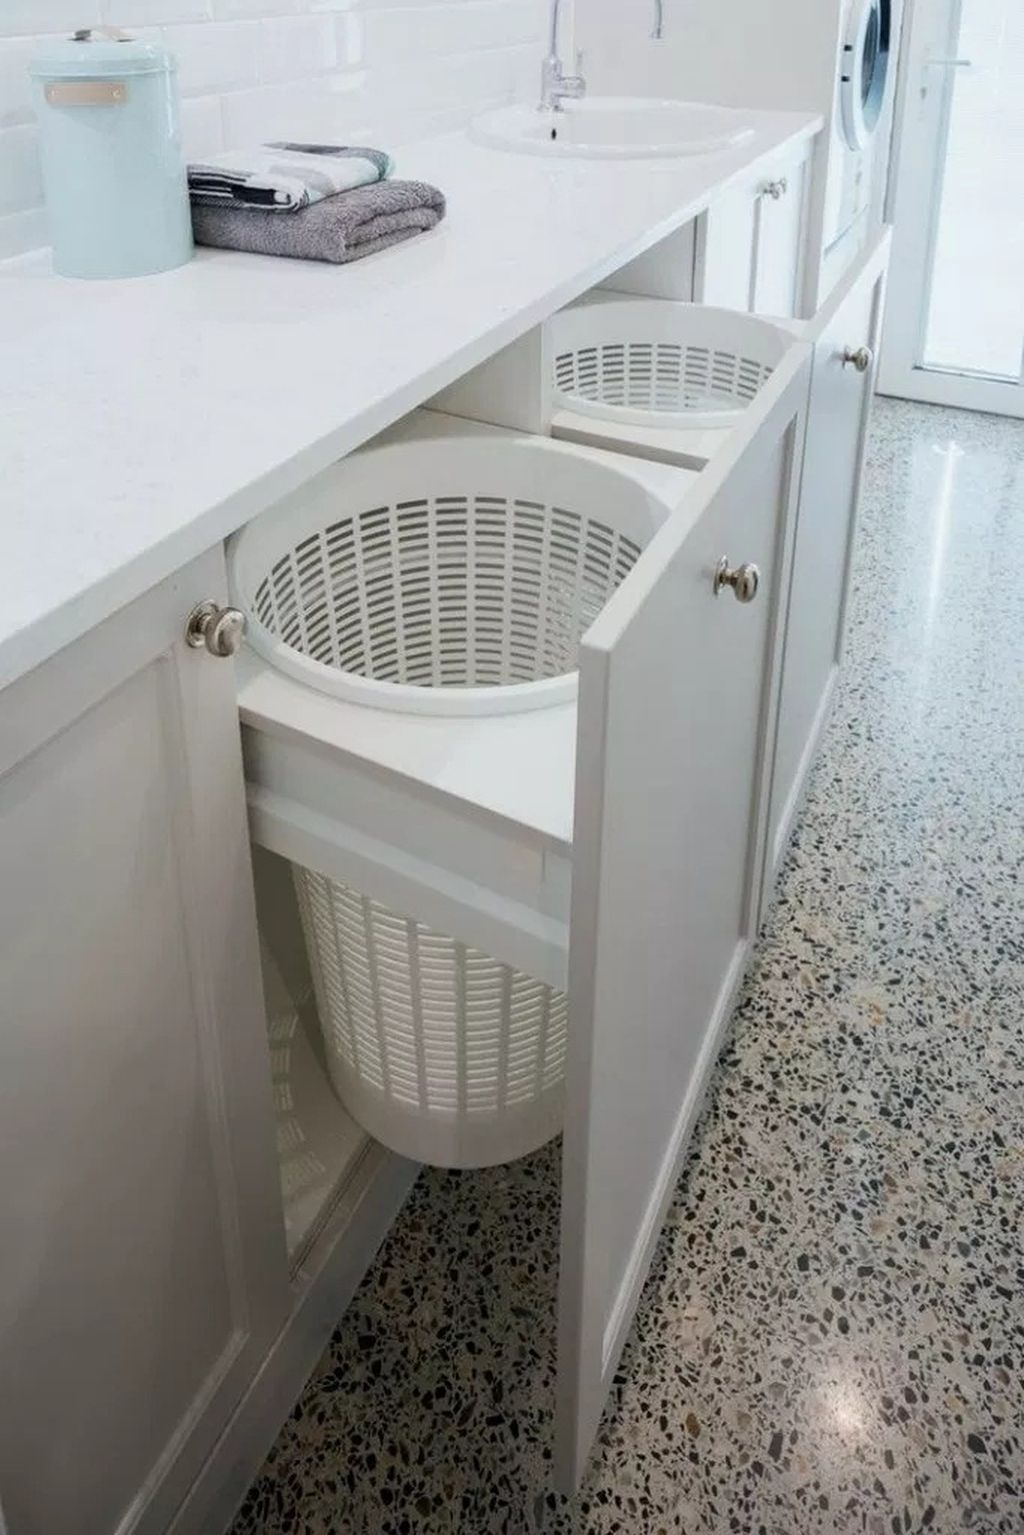 Favored Laundry Room Organization Ideas To Try 08